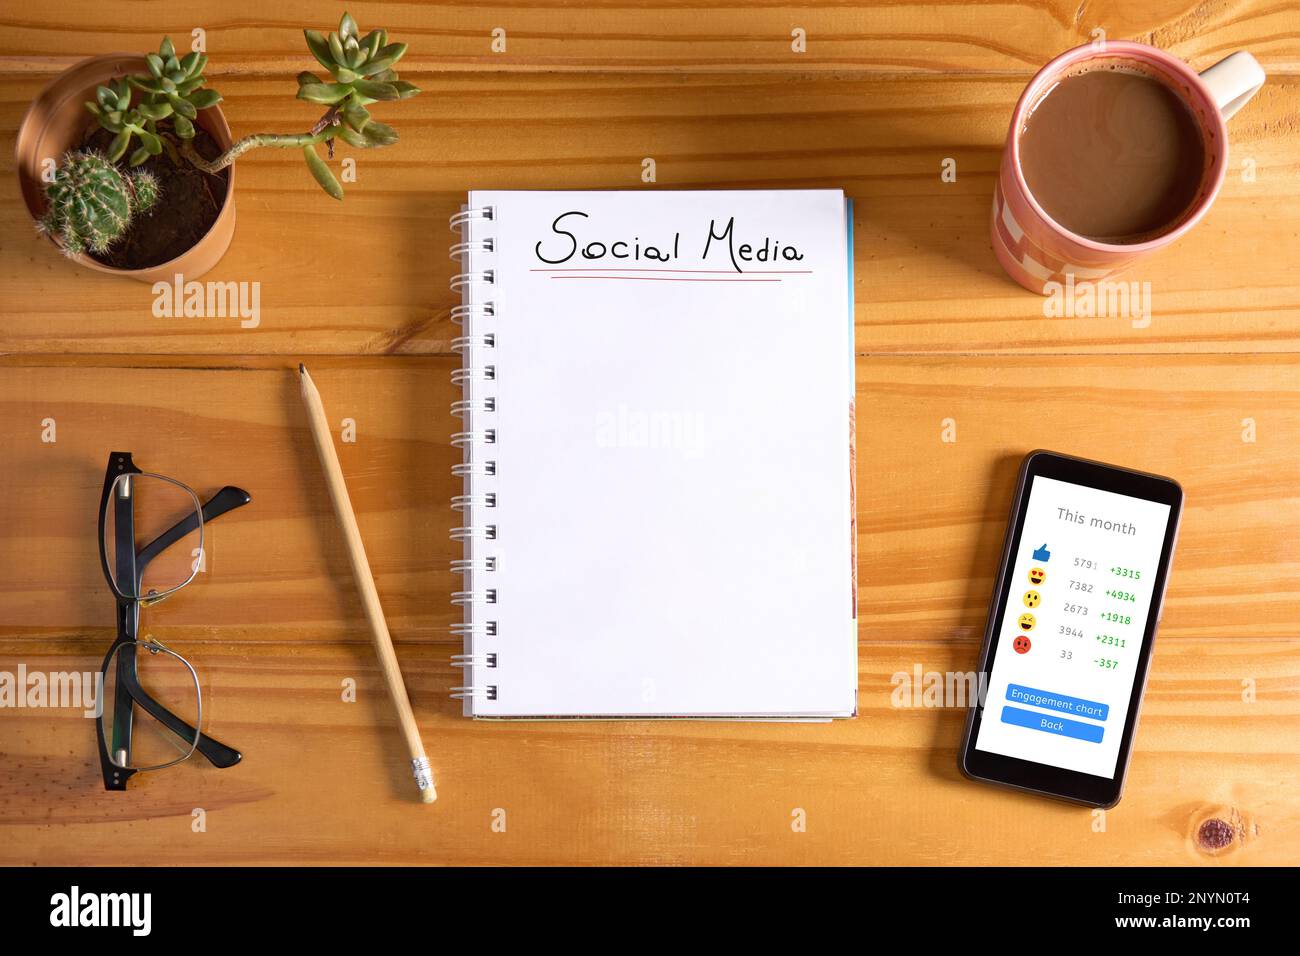 Top view of notebook on table with 'Social media' text on blank page and mobile phone with icons showing positive report of engagement on the screen. Stock Photo